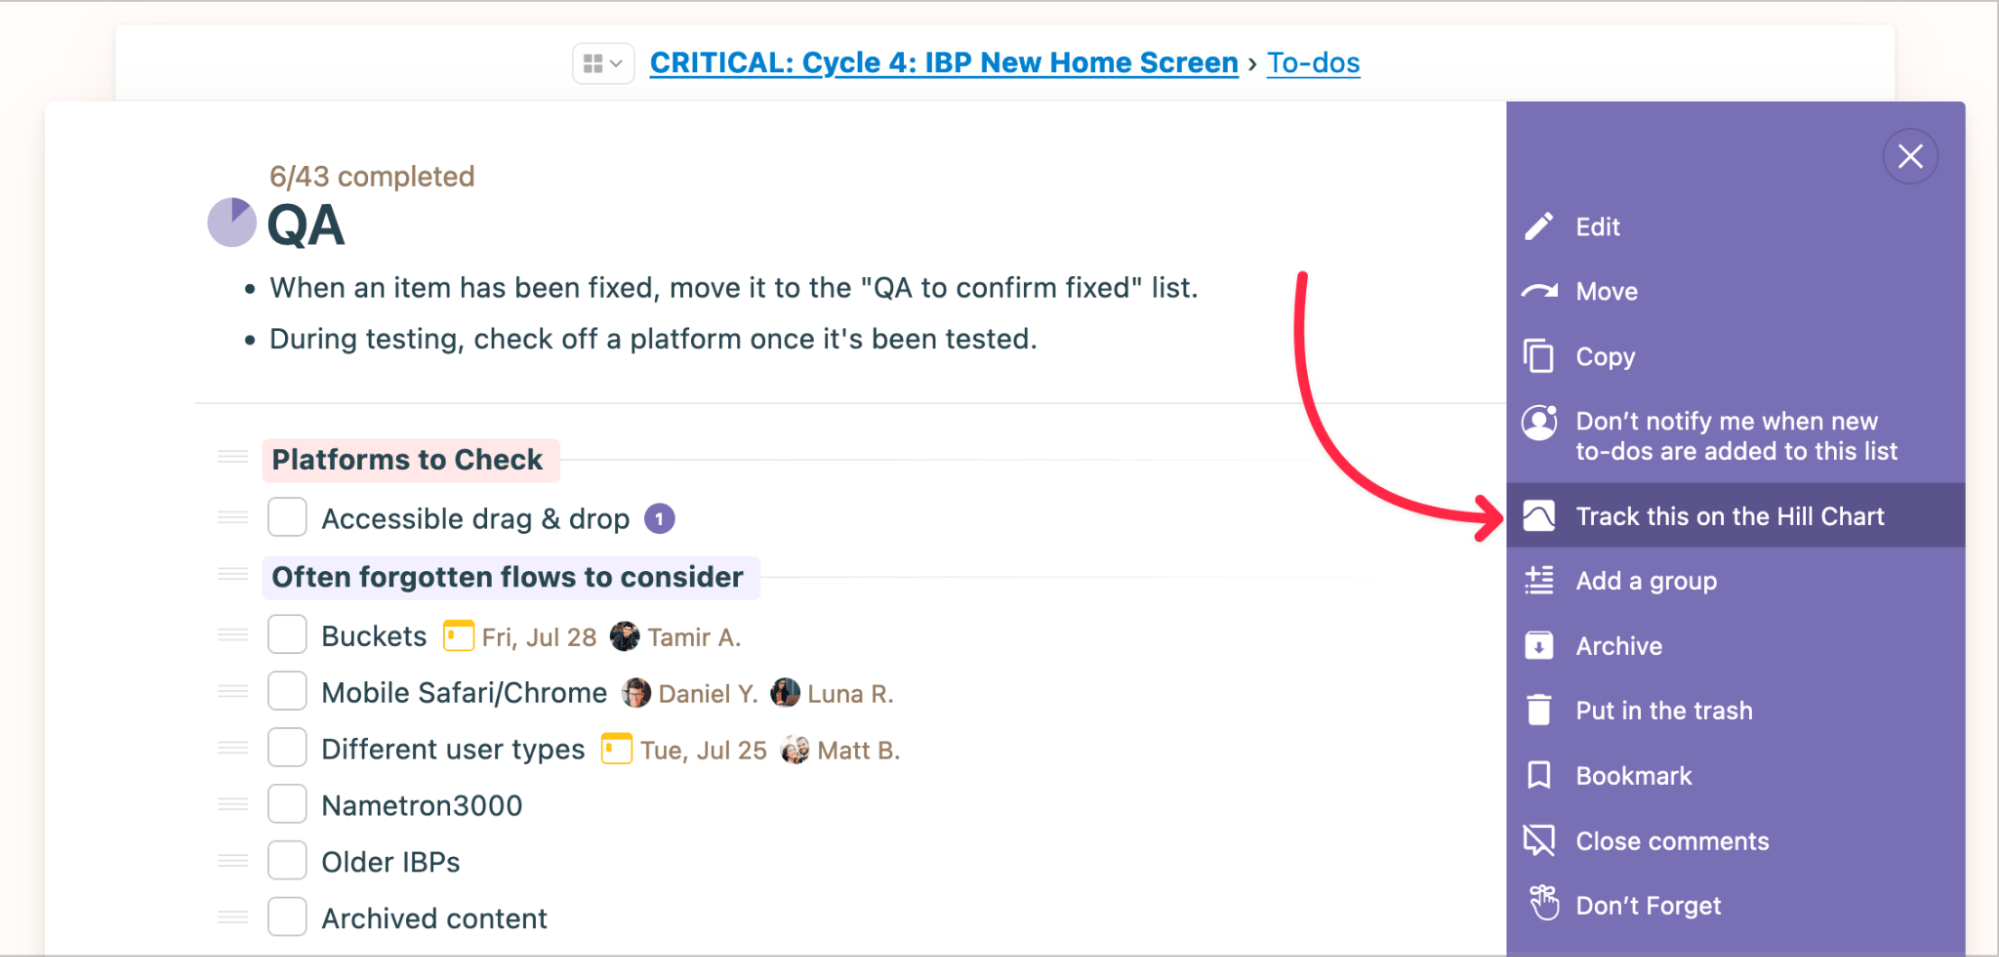 Screenshot showing how to access the hill chart in Basecamp